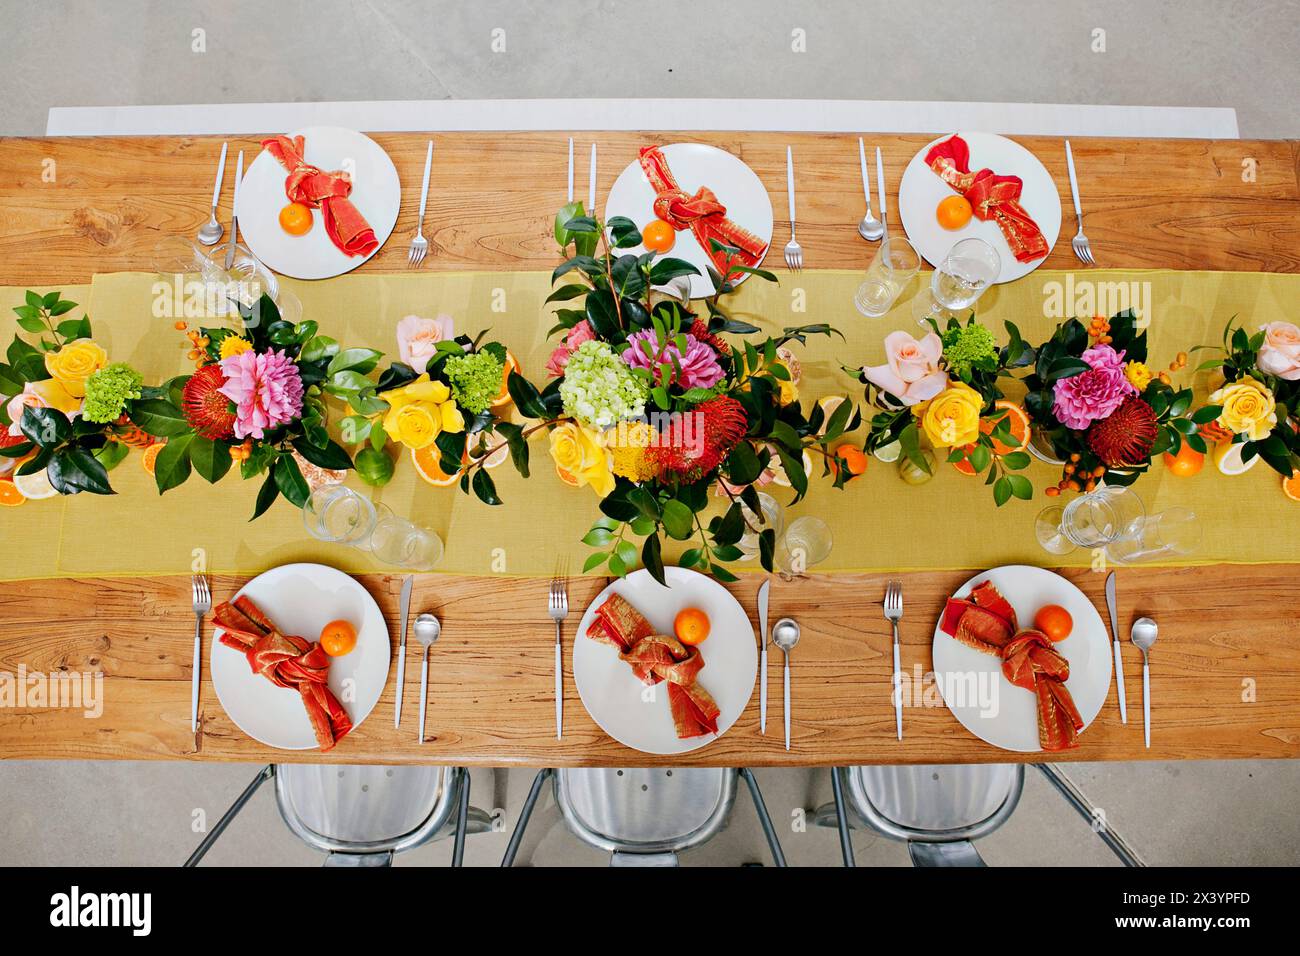 Lively table setting with floral and citrus elements. Stock Photo